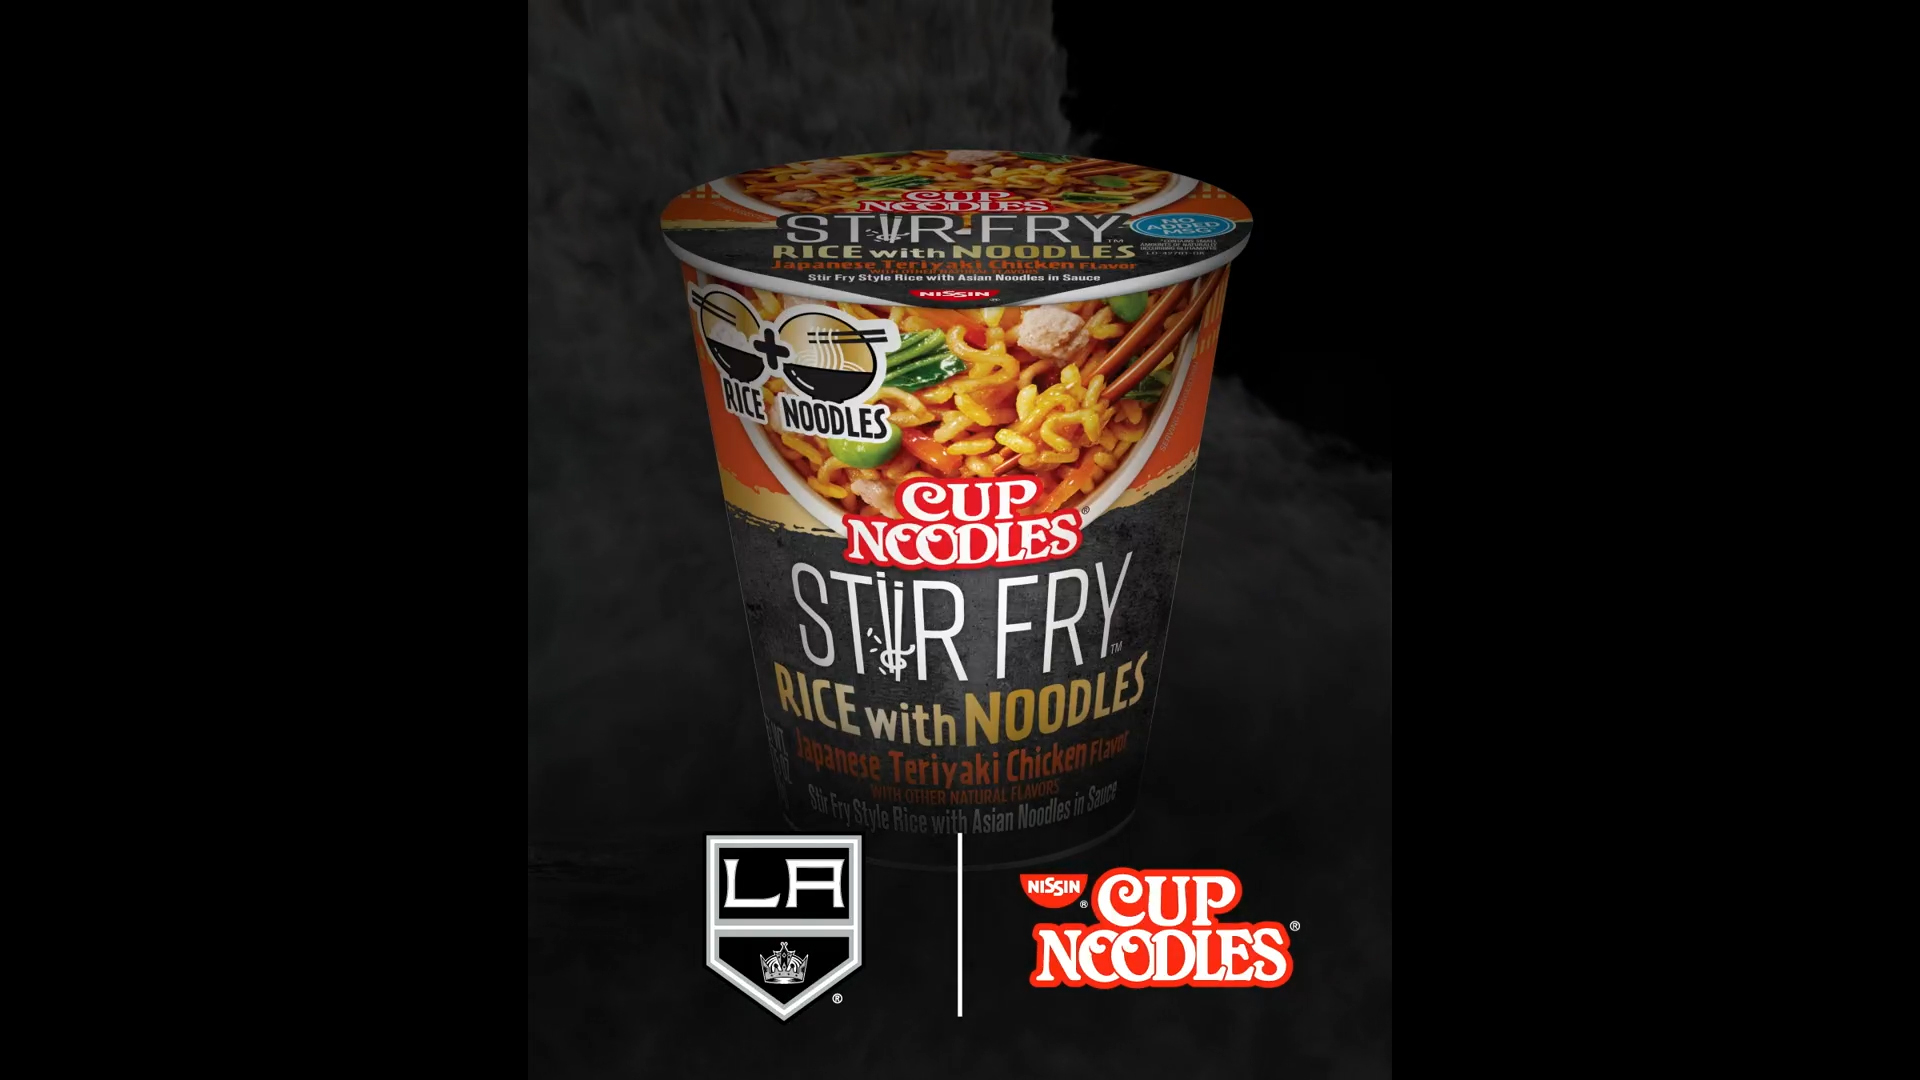 Cup Noodles, one of the beloved brands by Nissin Foods has been named by AEG an official partner of the LA Kings (NHL) and the Ontario Reign (AHL).